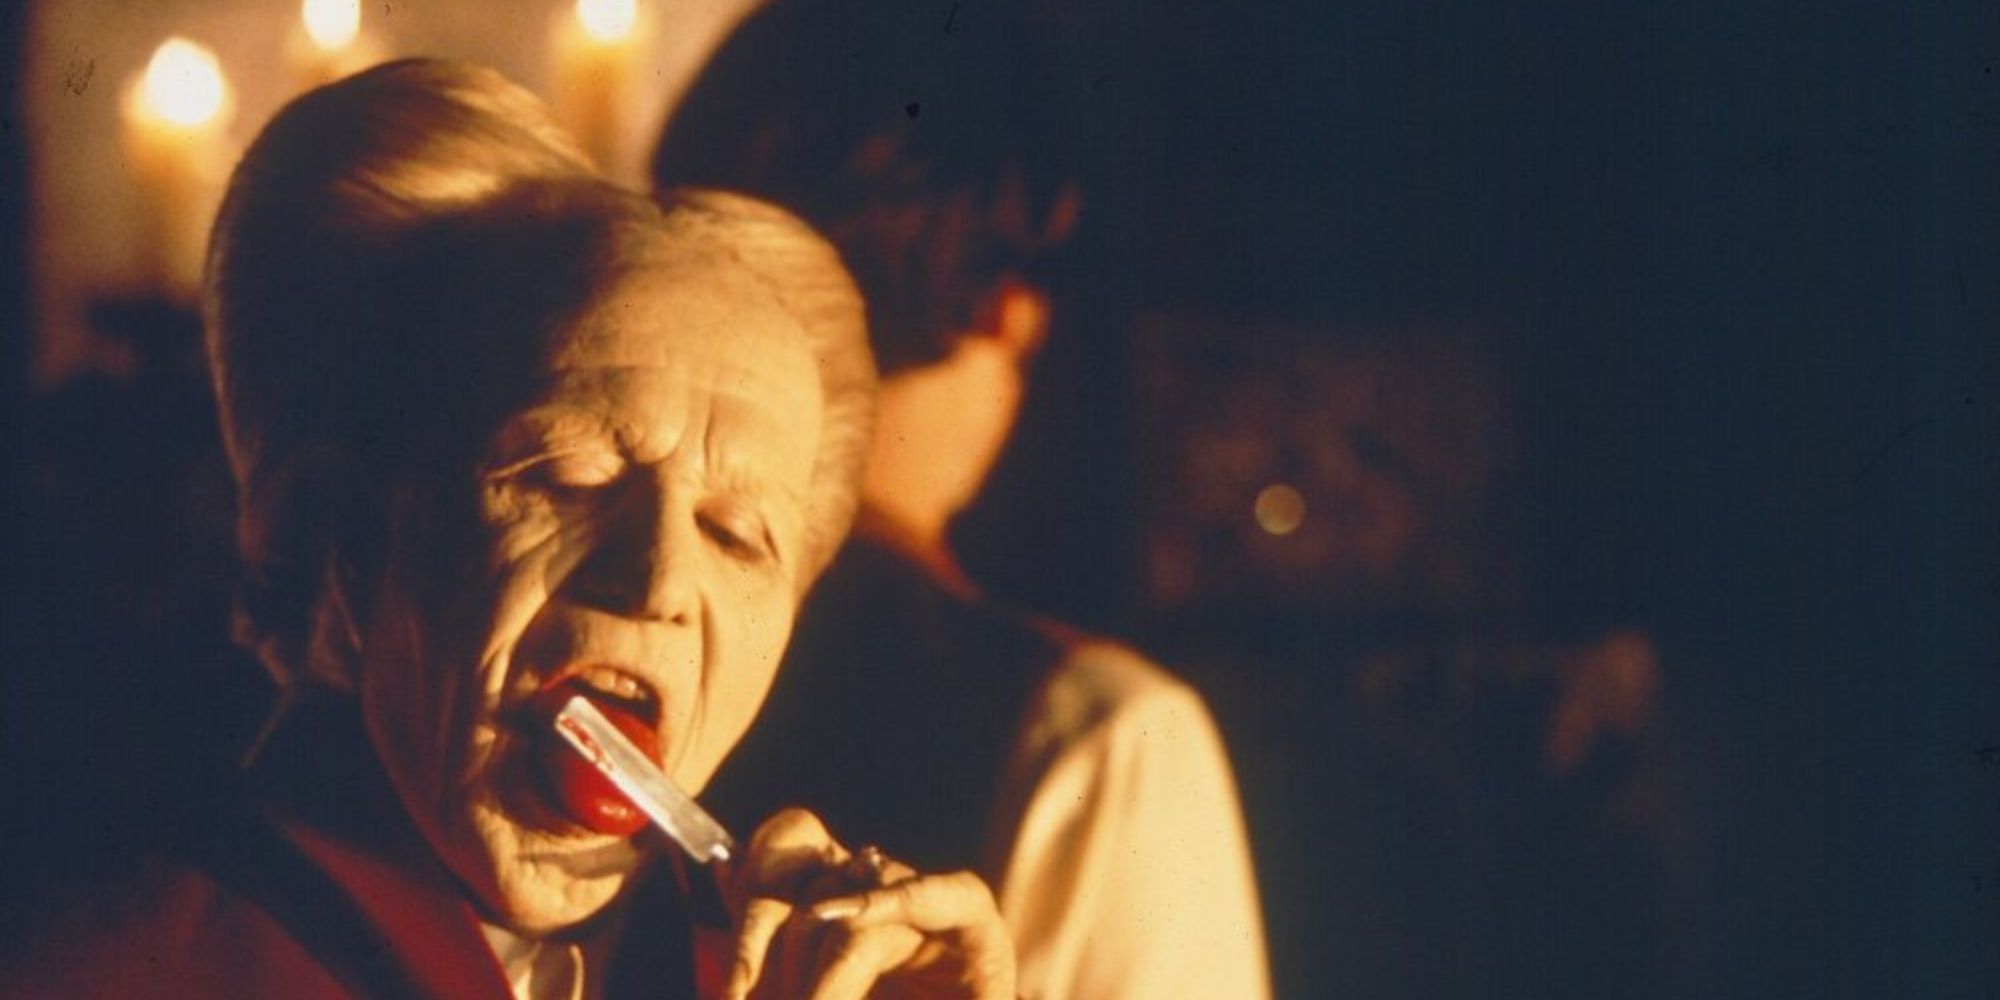 Gary Oldman as Count Dracula licking a razorblade with blood in Bram Stoker's Dracula (1992)